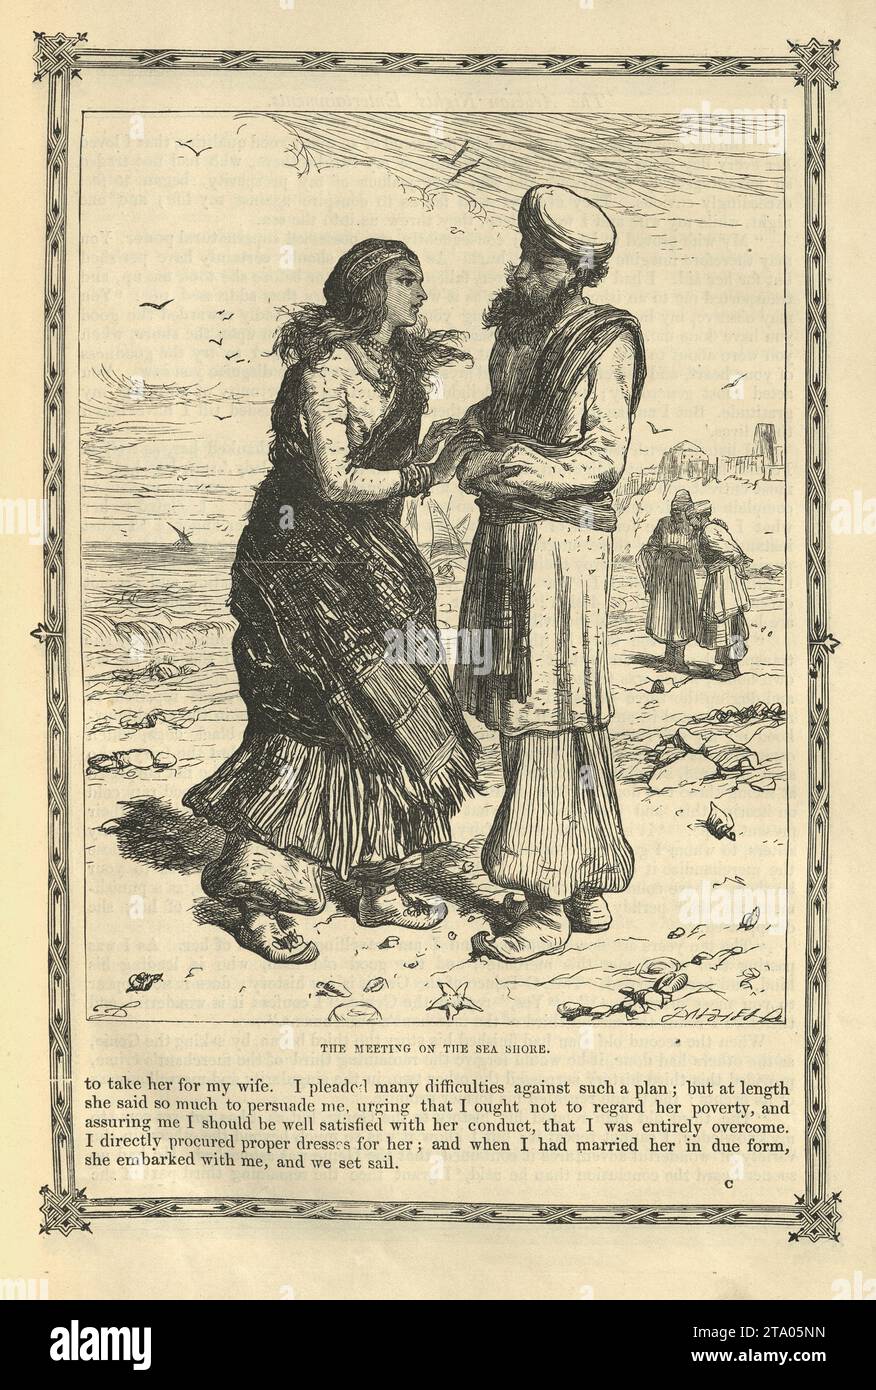 Vintage illustration One Thousand and One Nights, The meeting on the sea shore, Arabian, Middle Eastern folktales, by The Brothers Dalziel Stock Photo